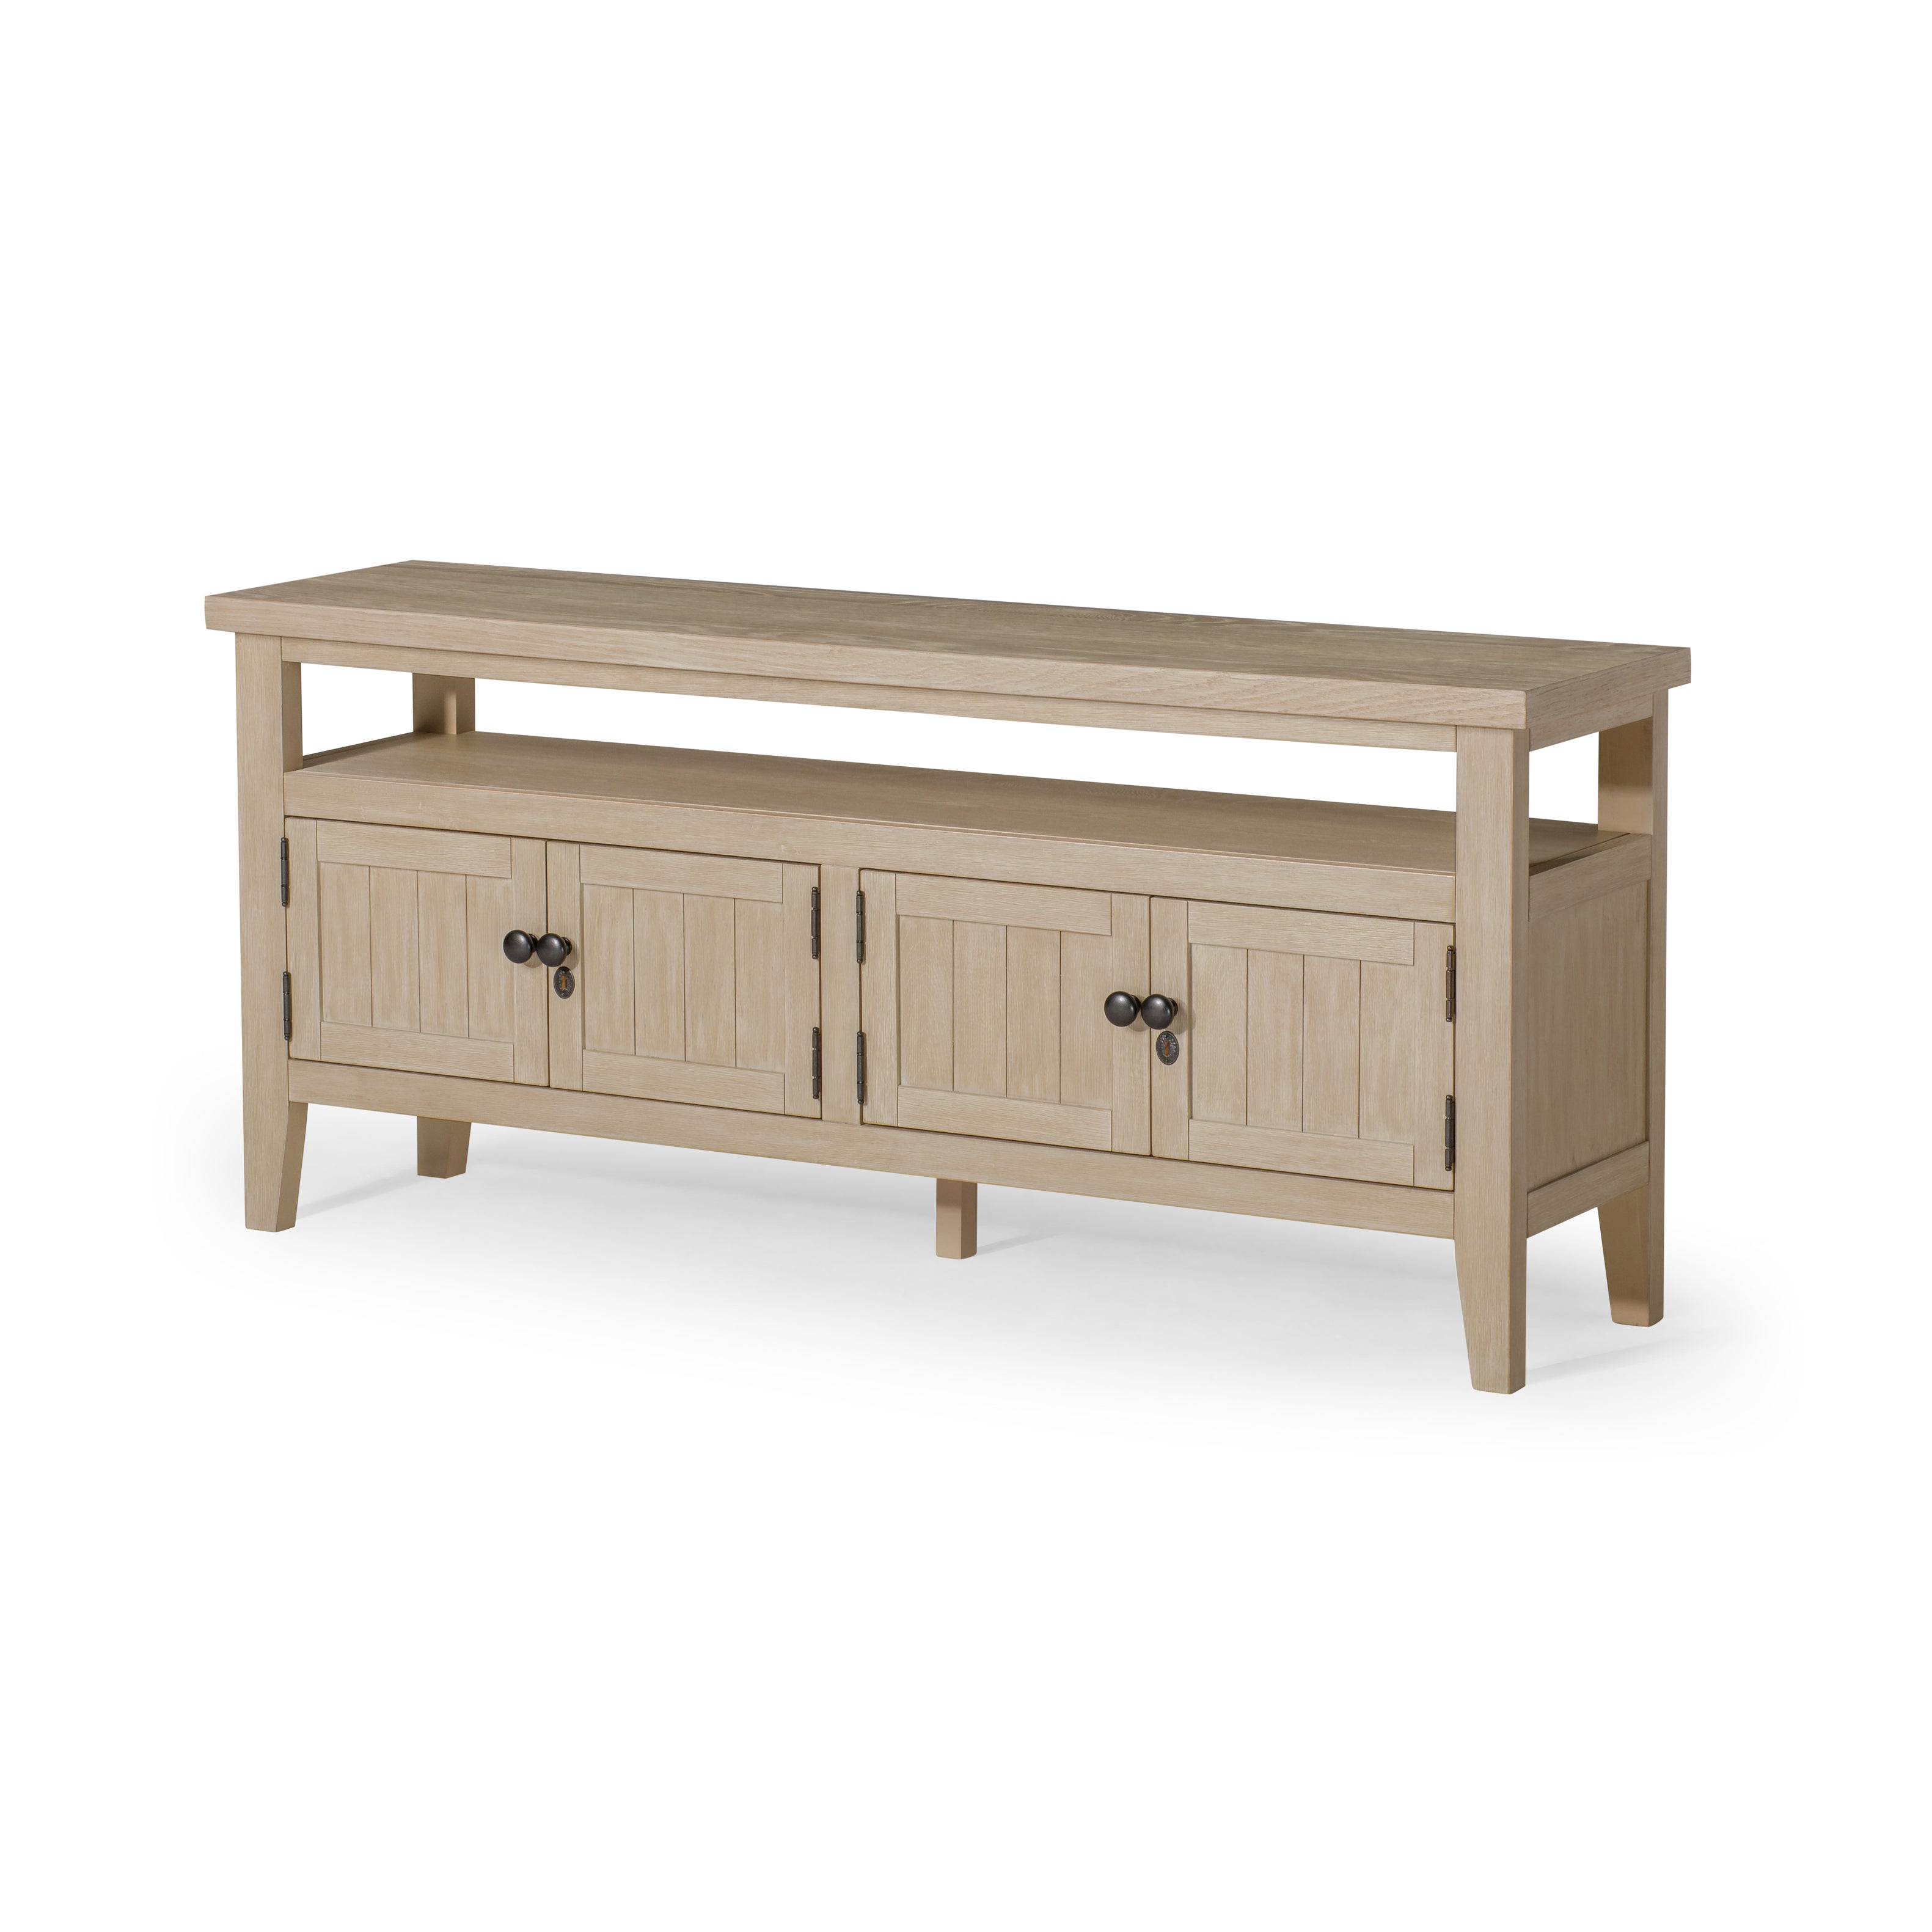 Turner Classical Wooden Media Unit in Antiqued White Finish in Media Units by Maven Lane